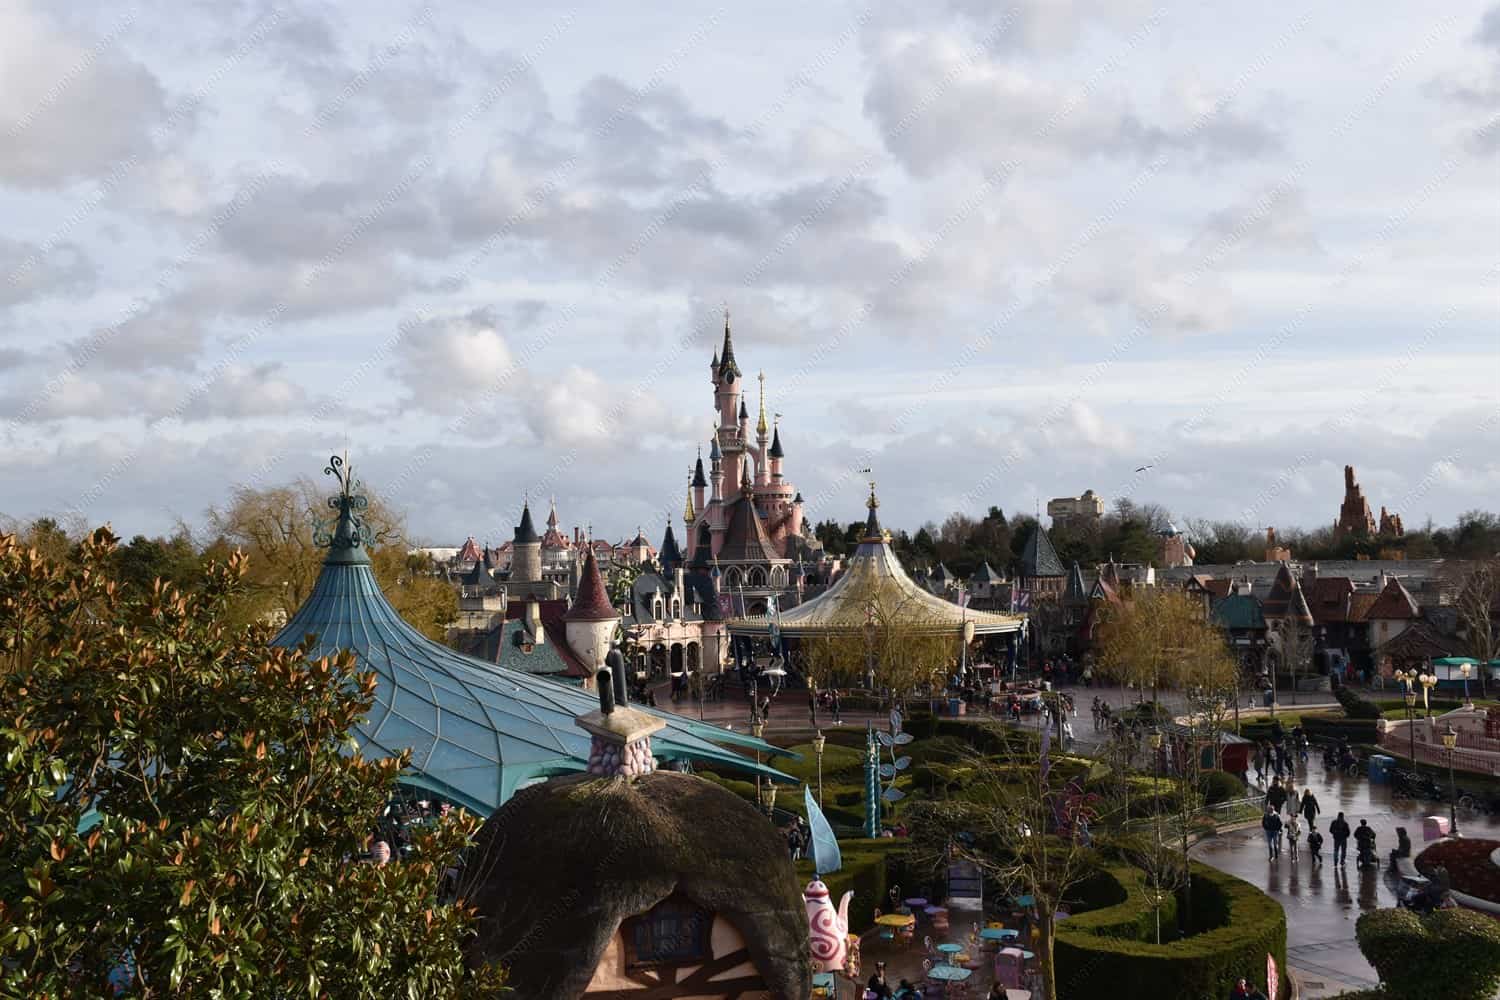 You are currently viewing Fantasyland Disney World in Paris